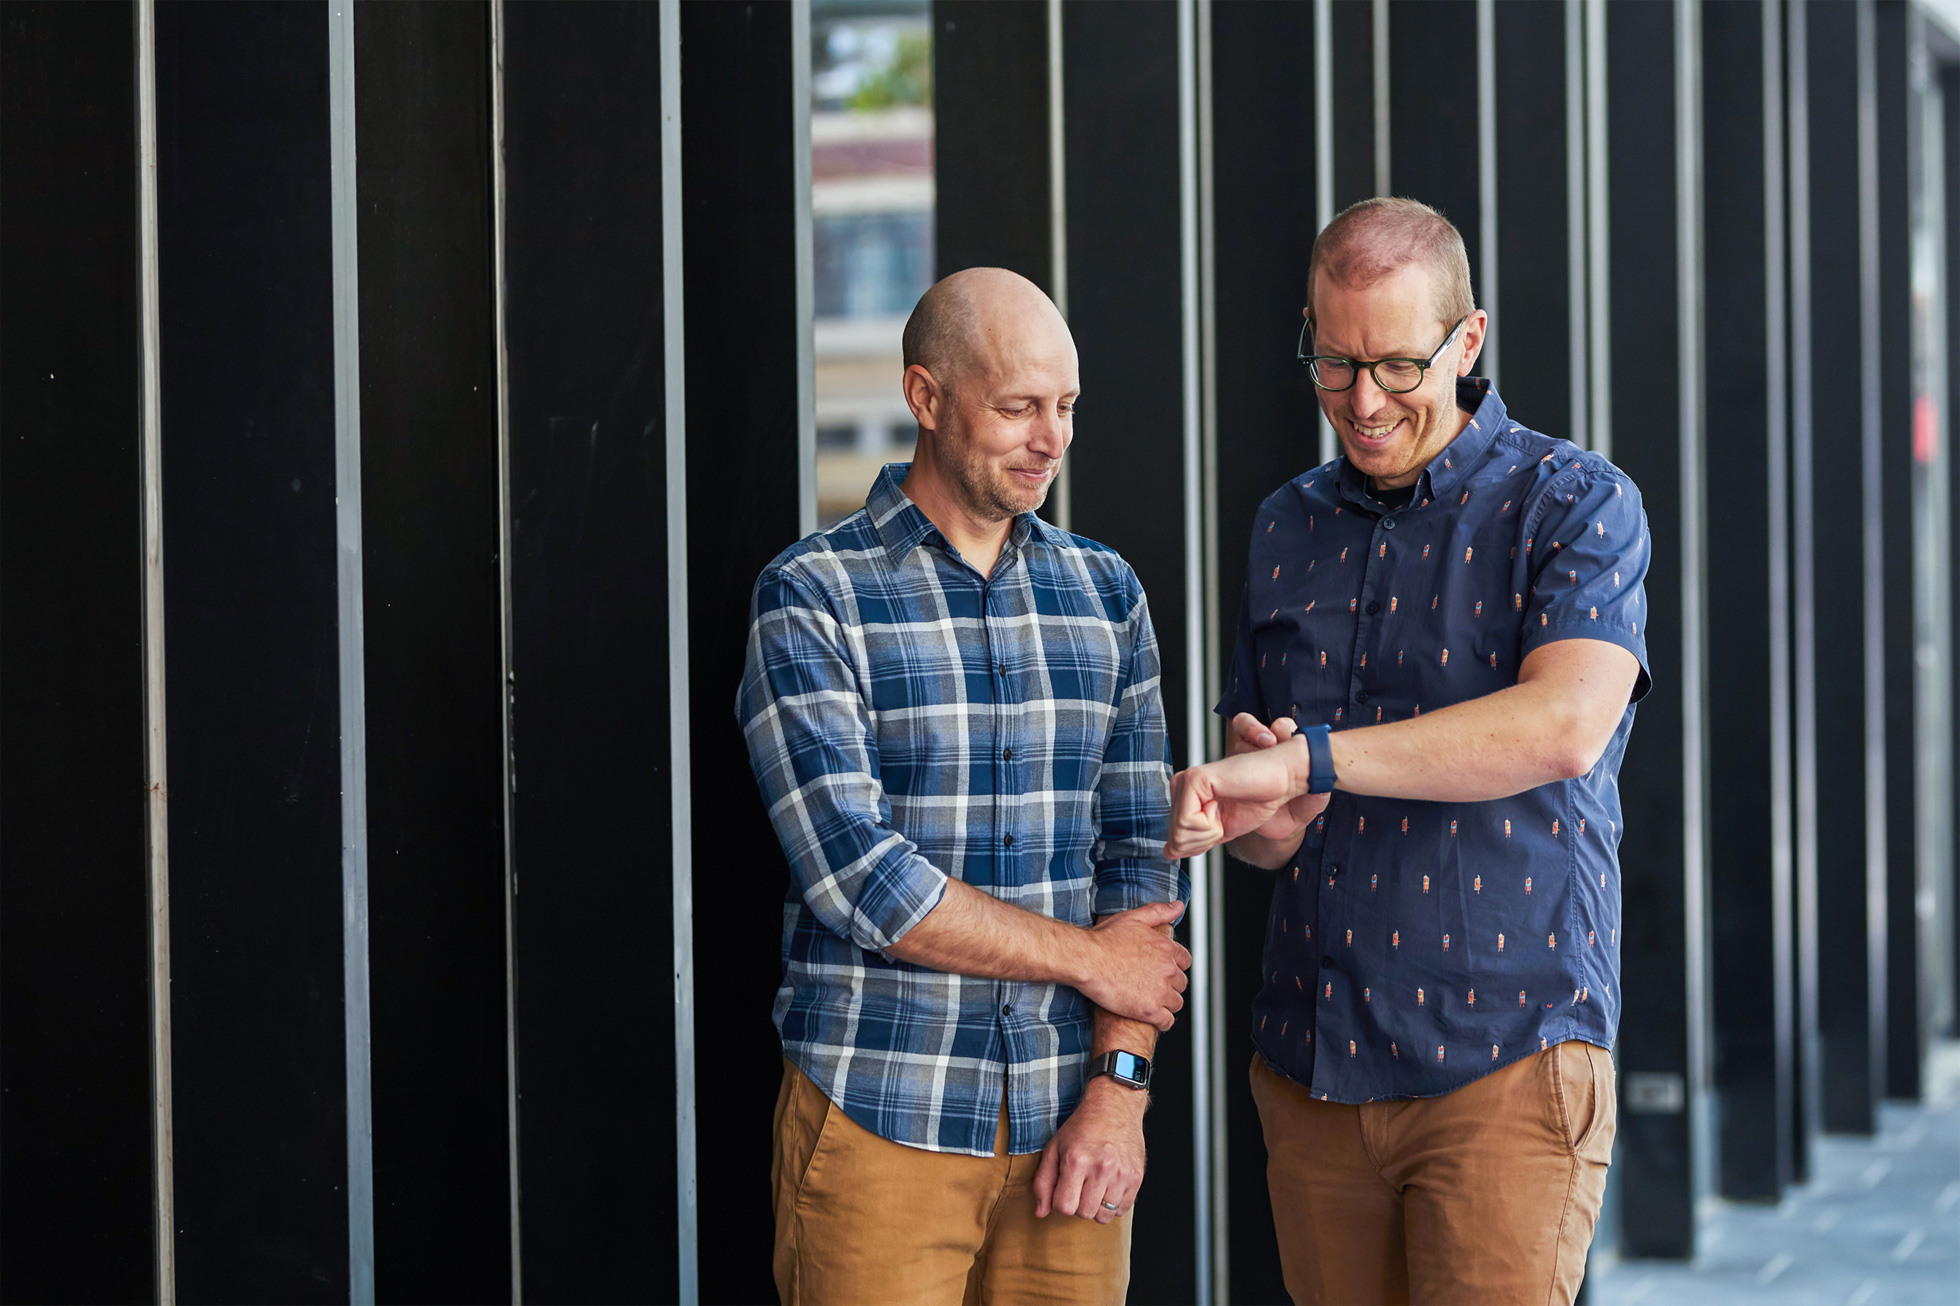 Justin Almering (left) and Anthony Harrison, co-founders of Melbourne, Australia-based ETA, wanted to solve the challenge of being punctual while traveling with a simple, beautiful app for iPhone and Apple Watch.